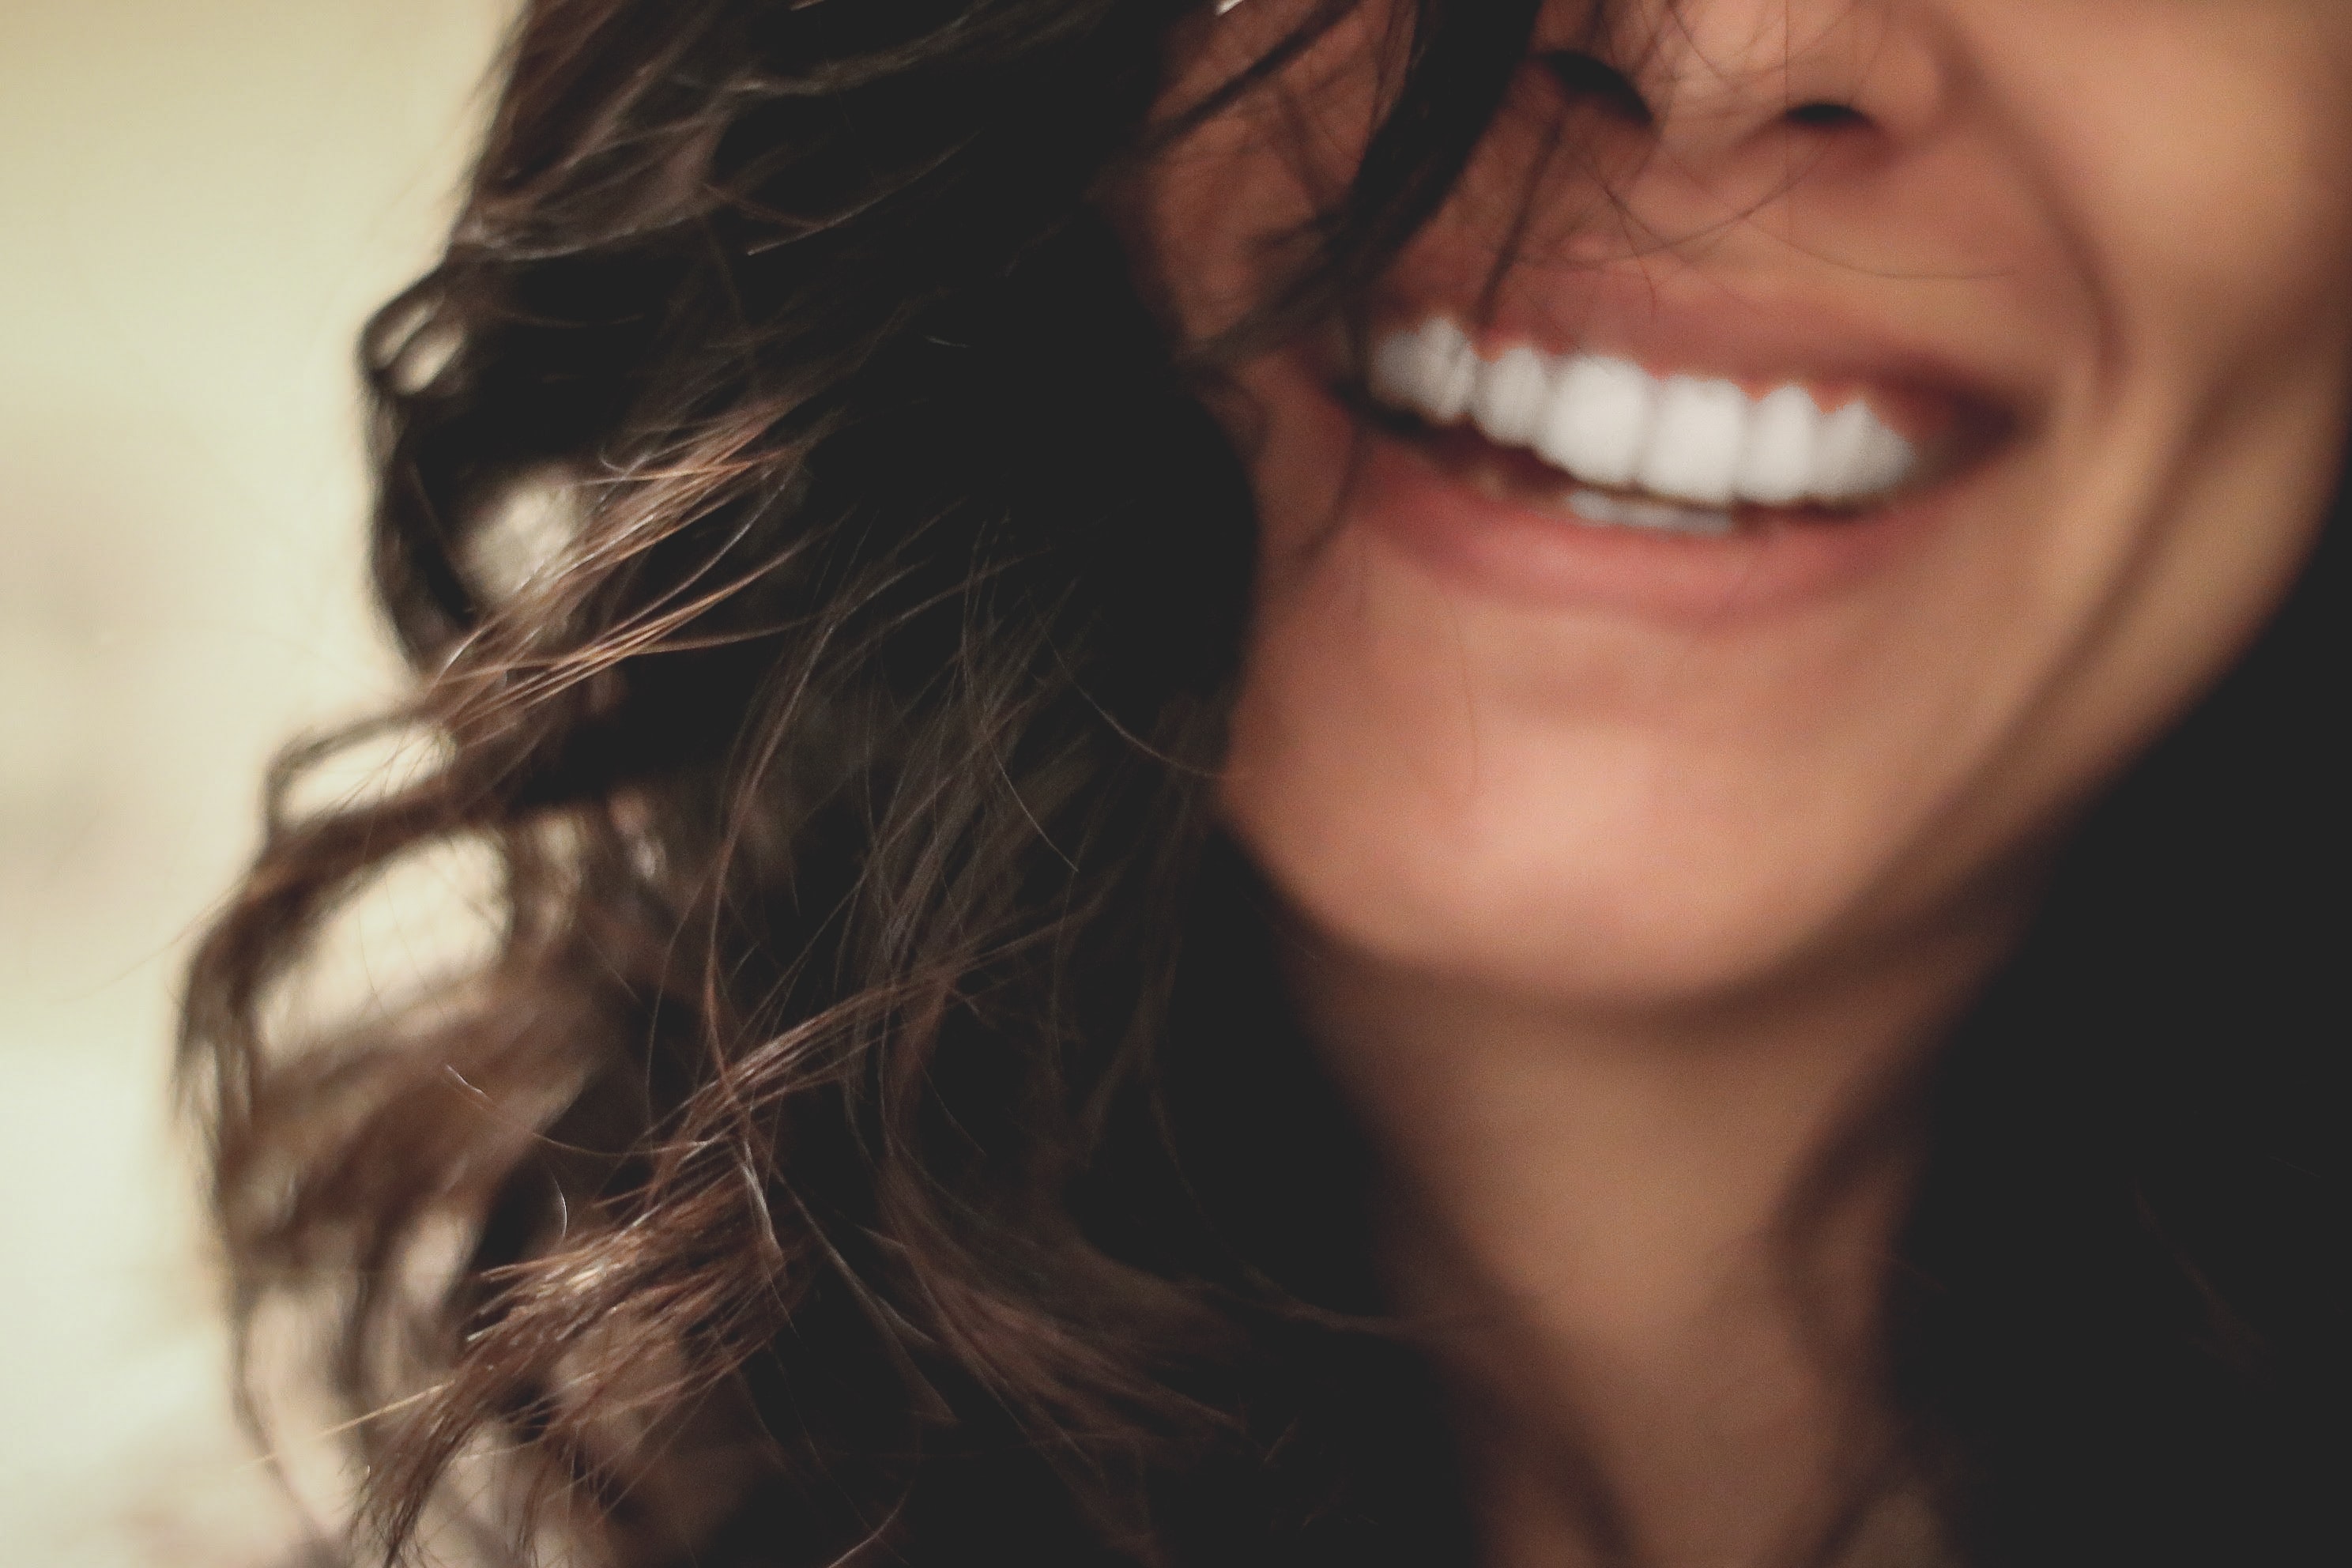 A woman smiles, showing off bright white teeth.